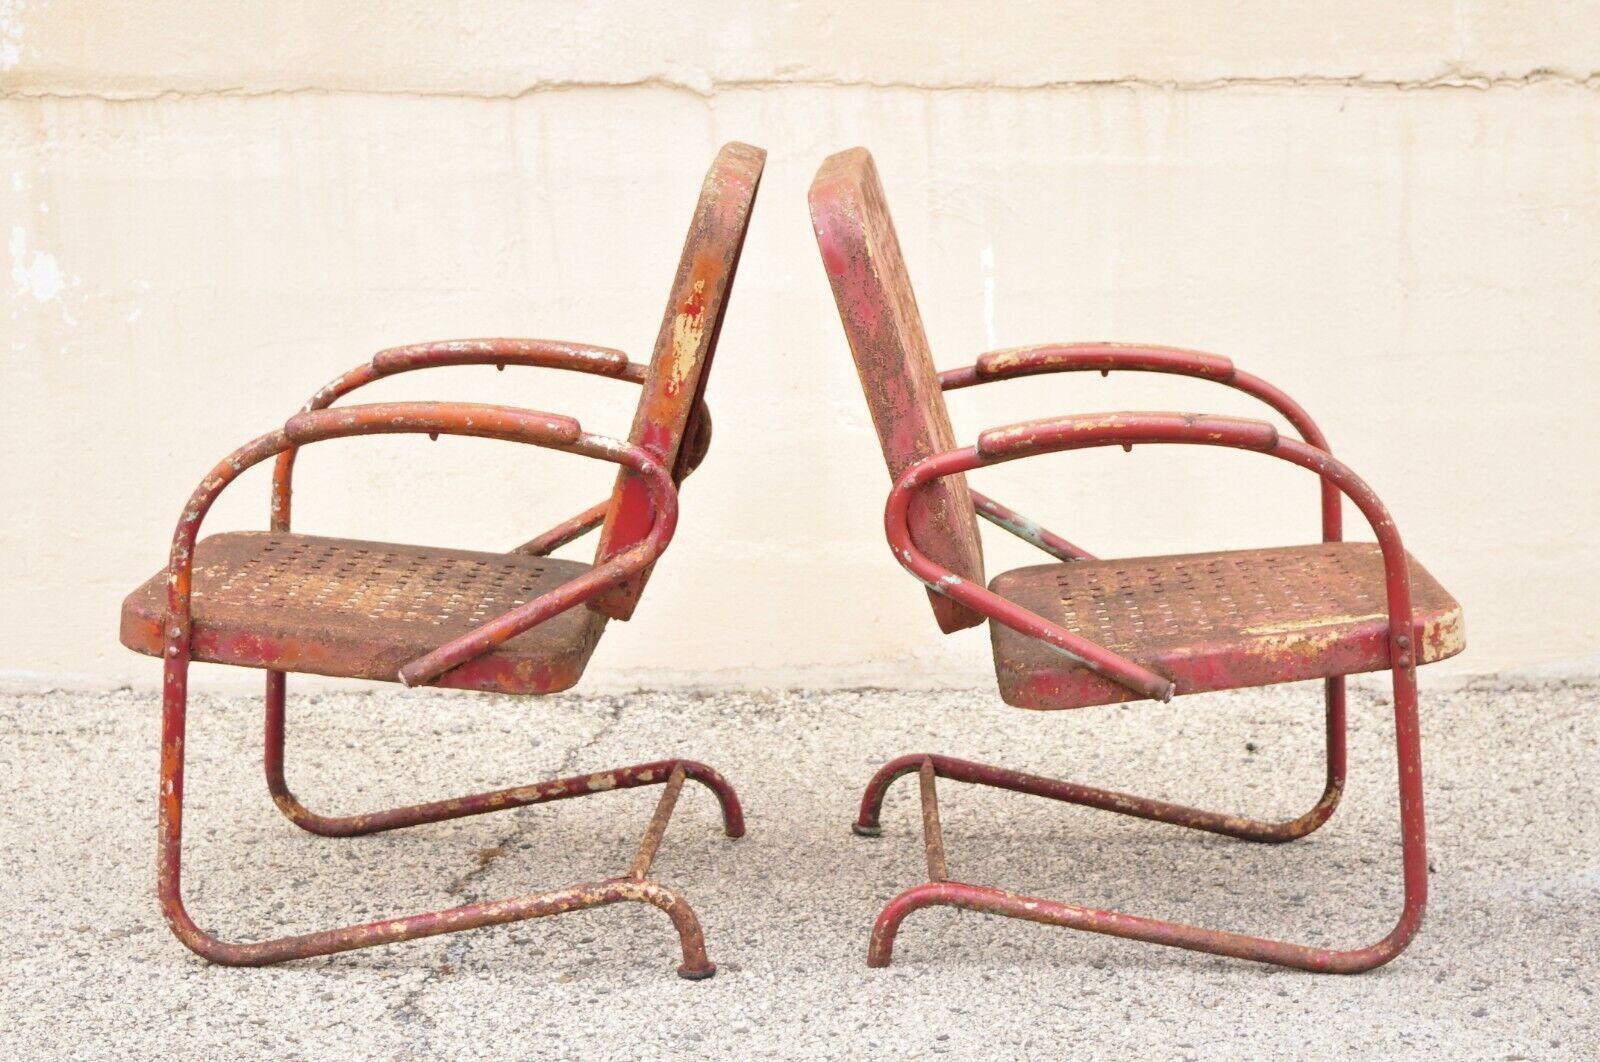 Antique Art Deco basketweave red distress paint bouncer garden chairs - a pair. Item features steel metal bouncer frame, red distress painted finish, basketweave seat and back, very nice antique pair, great style and form. Circa early 20th Century.